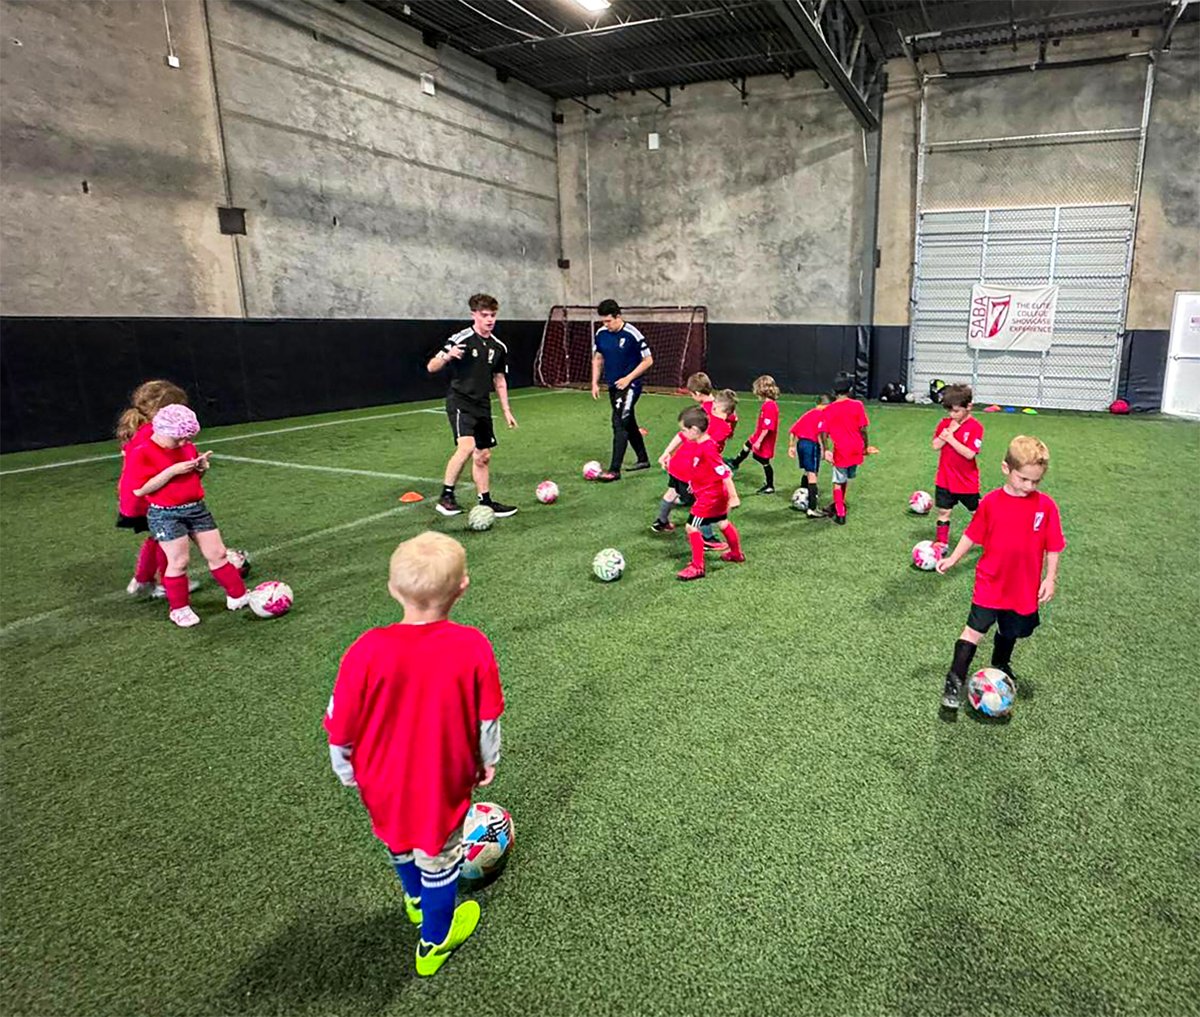 PRE ACADEMY 🇺🇸🇬🇧🇹🇿 It's been great to see our players and staff enjoying Pre Academy in both Salt Lake City and St George this week, as we continue with Spring/Winter Cycles ⚽️

FIND OUT MORE 👇
7eliteacademy.com/preacademy

#7EliteAcademy | #PlayerPathway | #UtahYouthSoccer | #UYSA